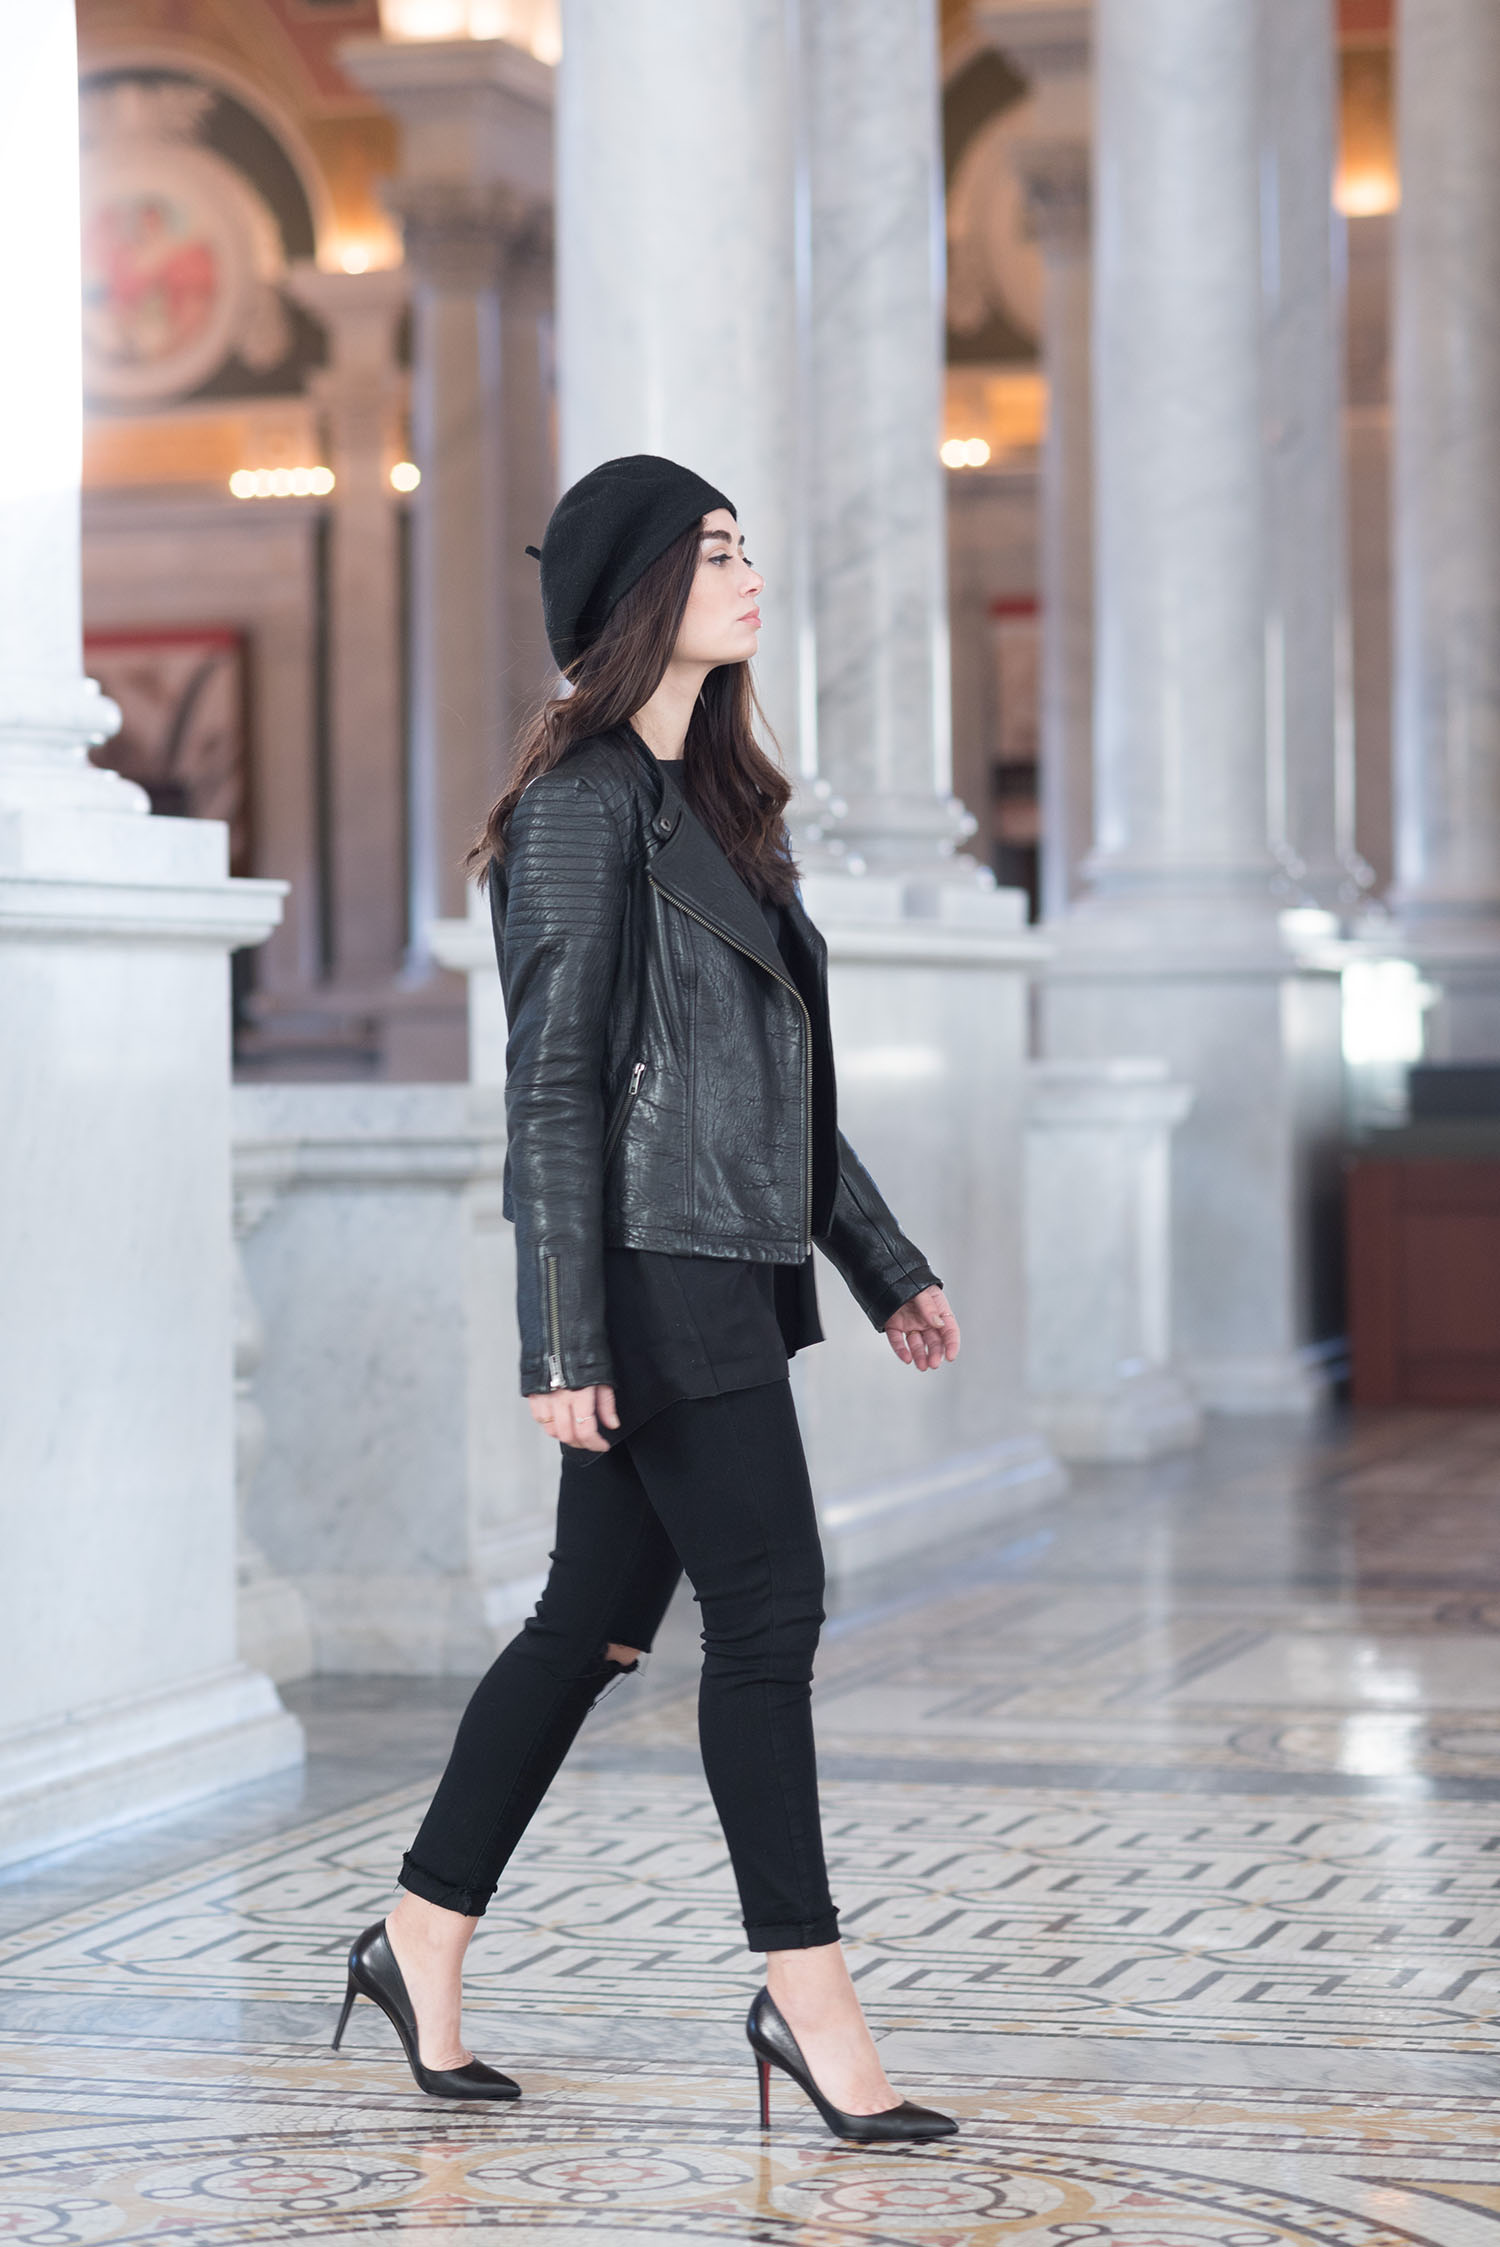 Canadian fashion blogger Cee Fardoe of Coco & Vera walks through the Library of Congress wearing an Anthropologie Bonnie beret and Aritzia Koons blouse